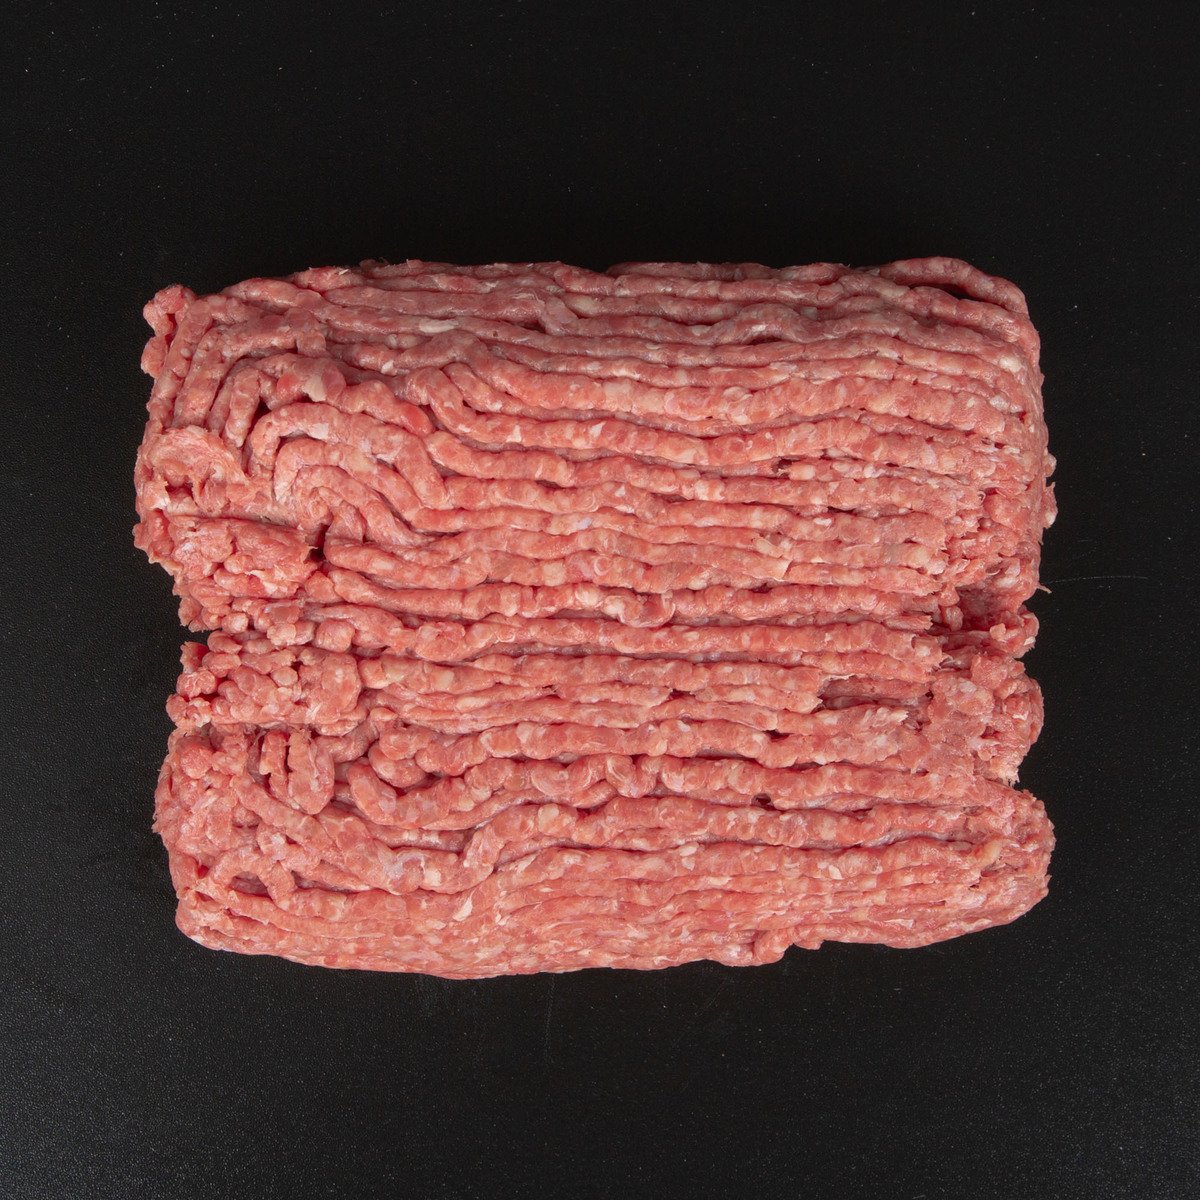 New Zealand Beef Mince 500g